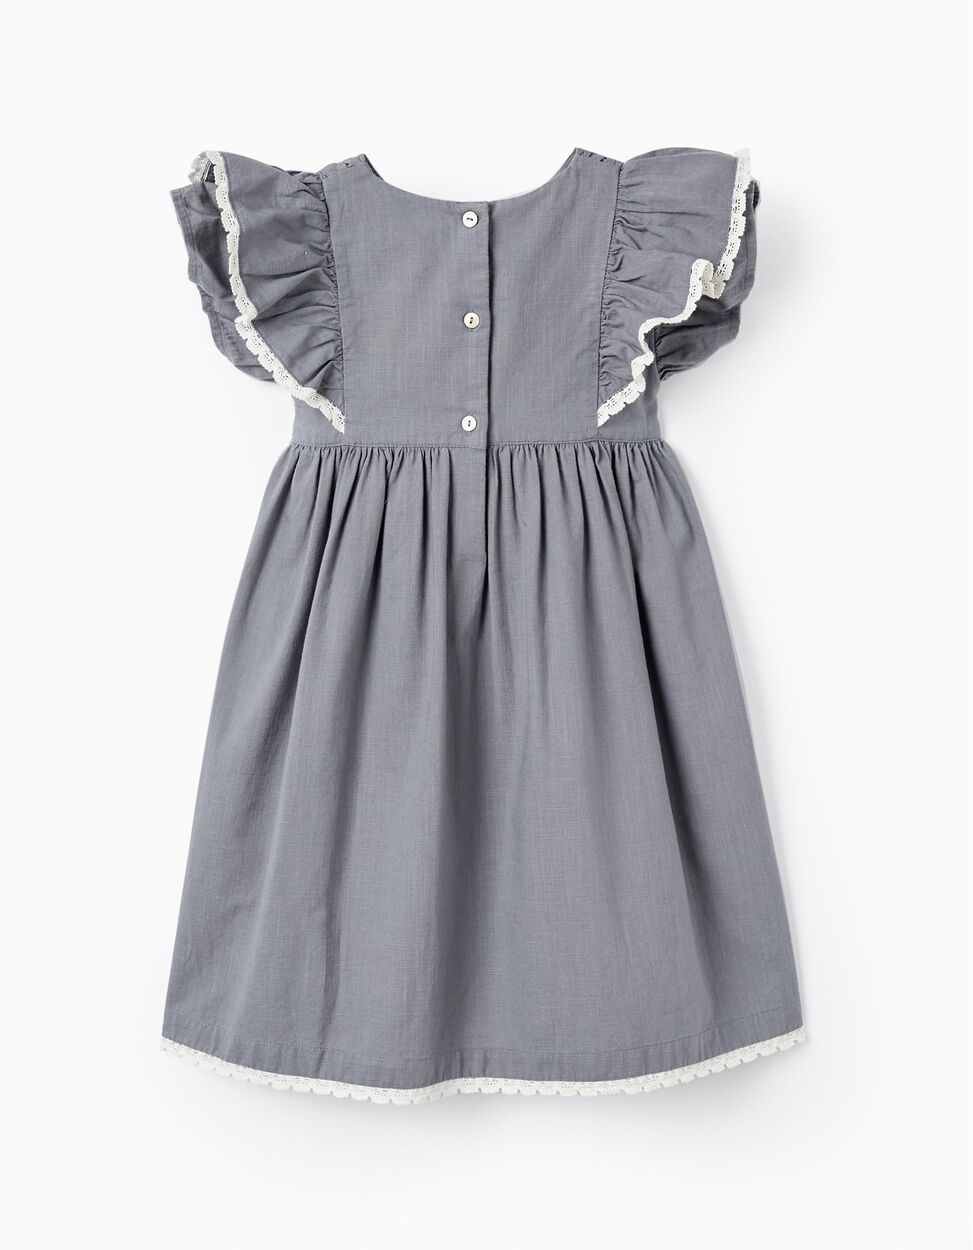 Buy Online Cotton Dress with Ruffles and Lace for Girls, Blue